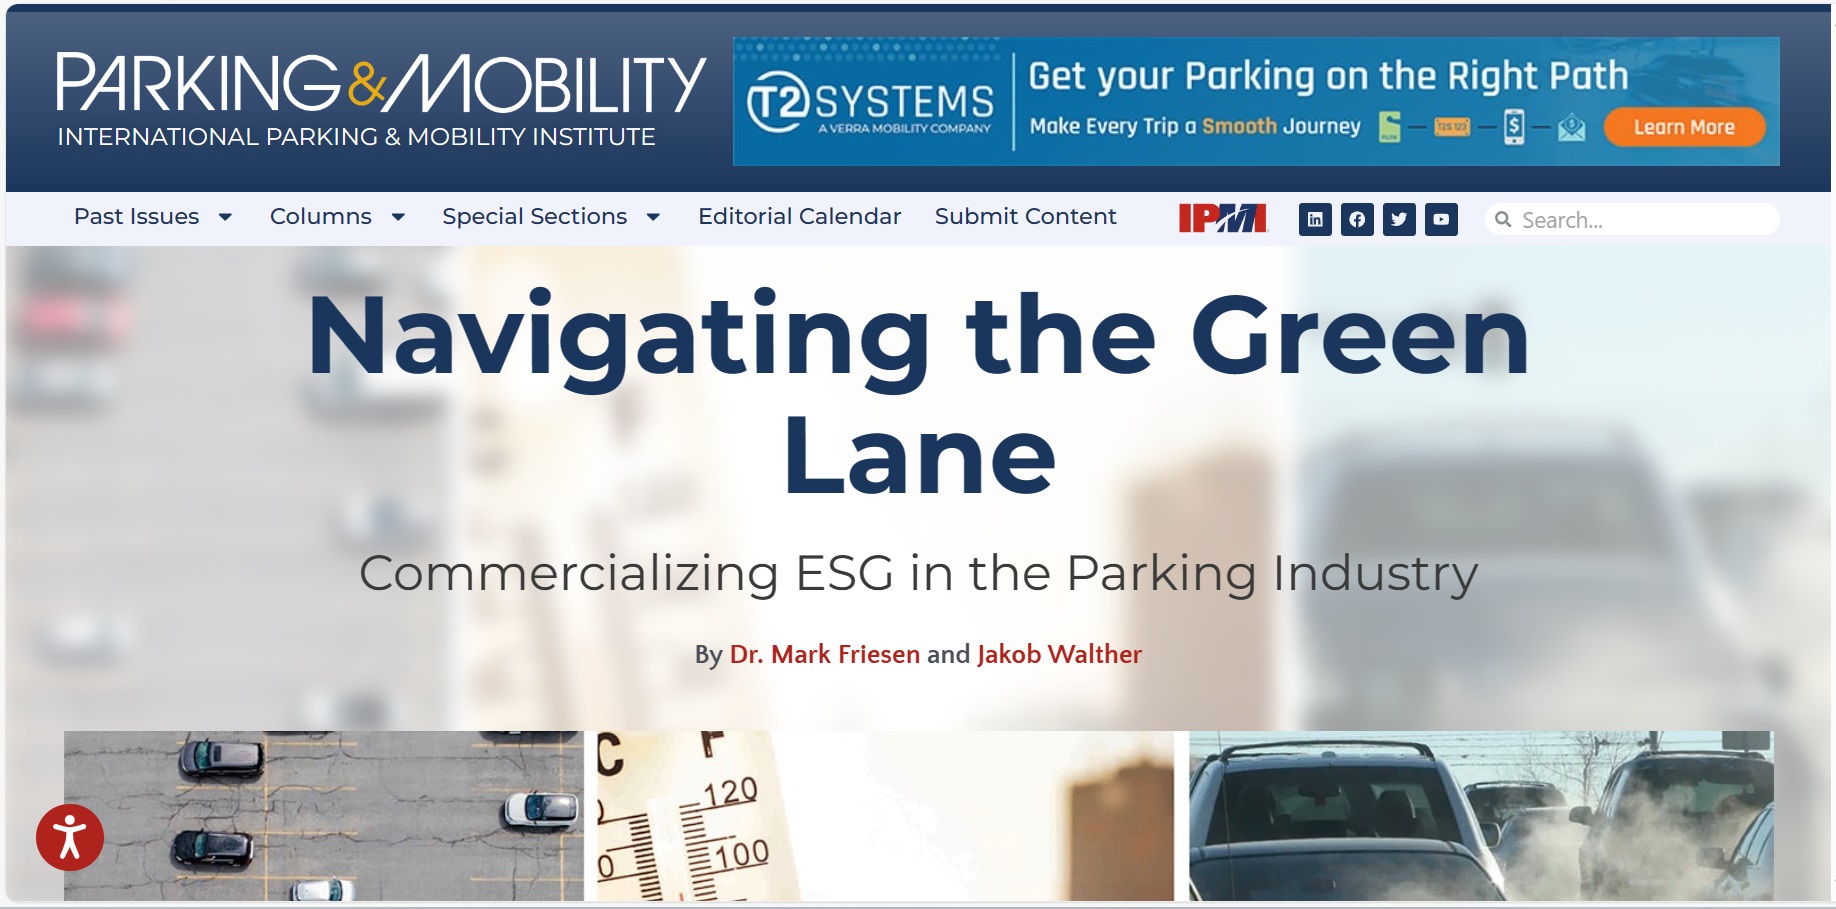 Commercializing ESG in the Parking Industry